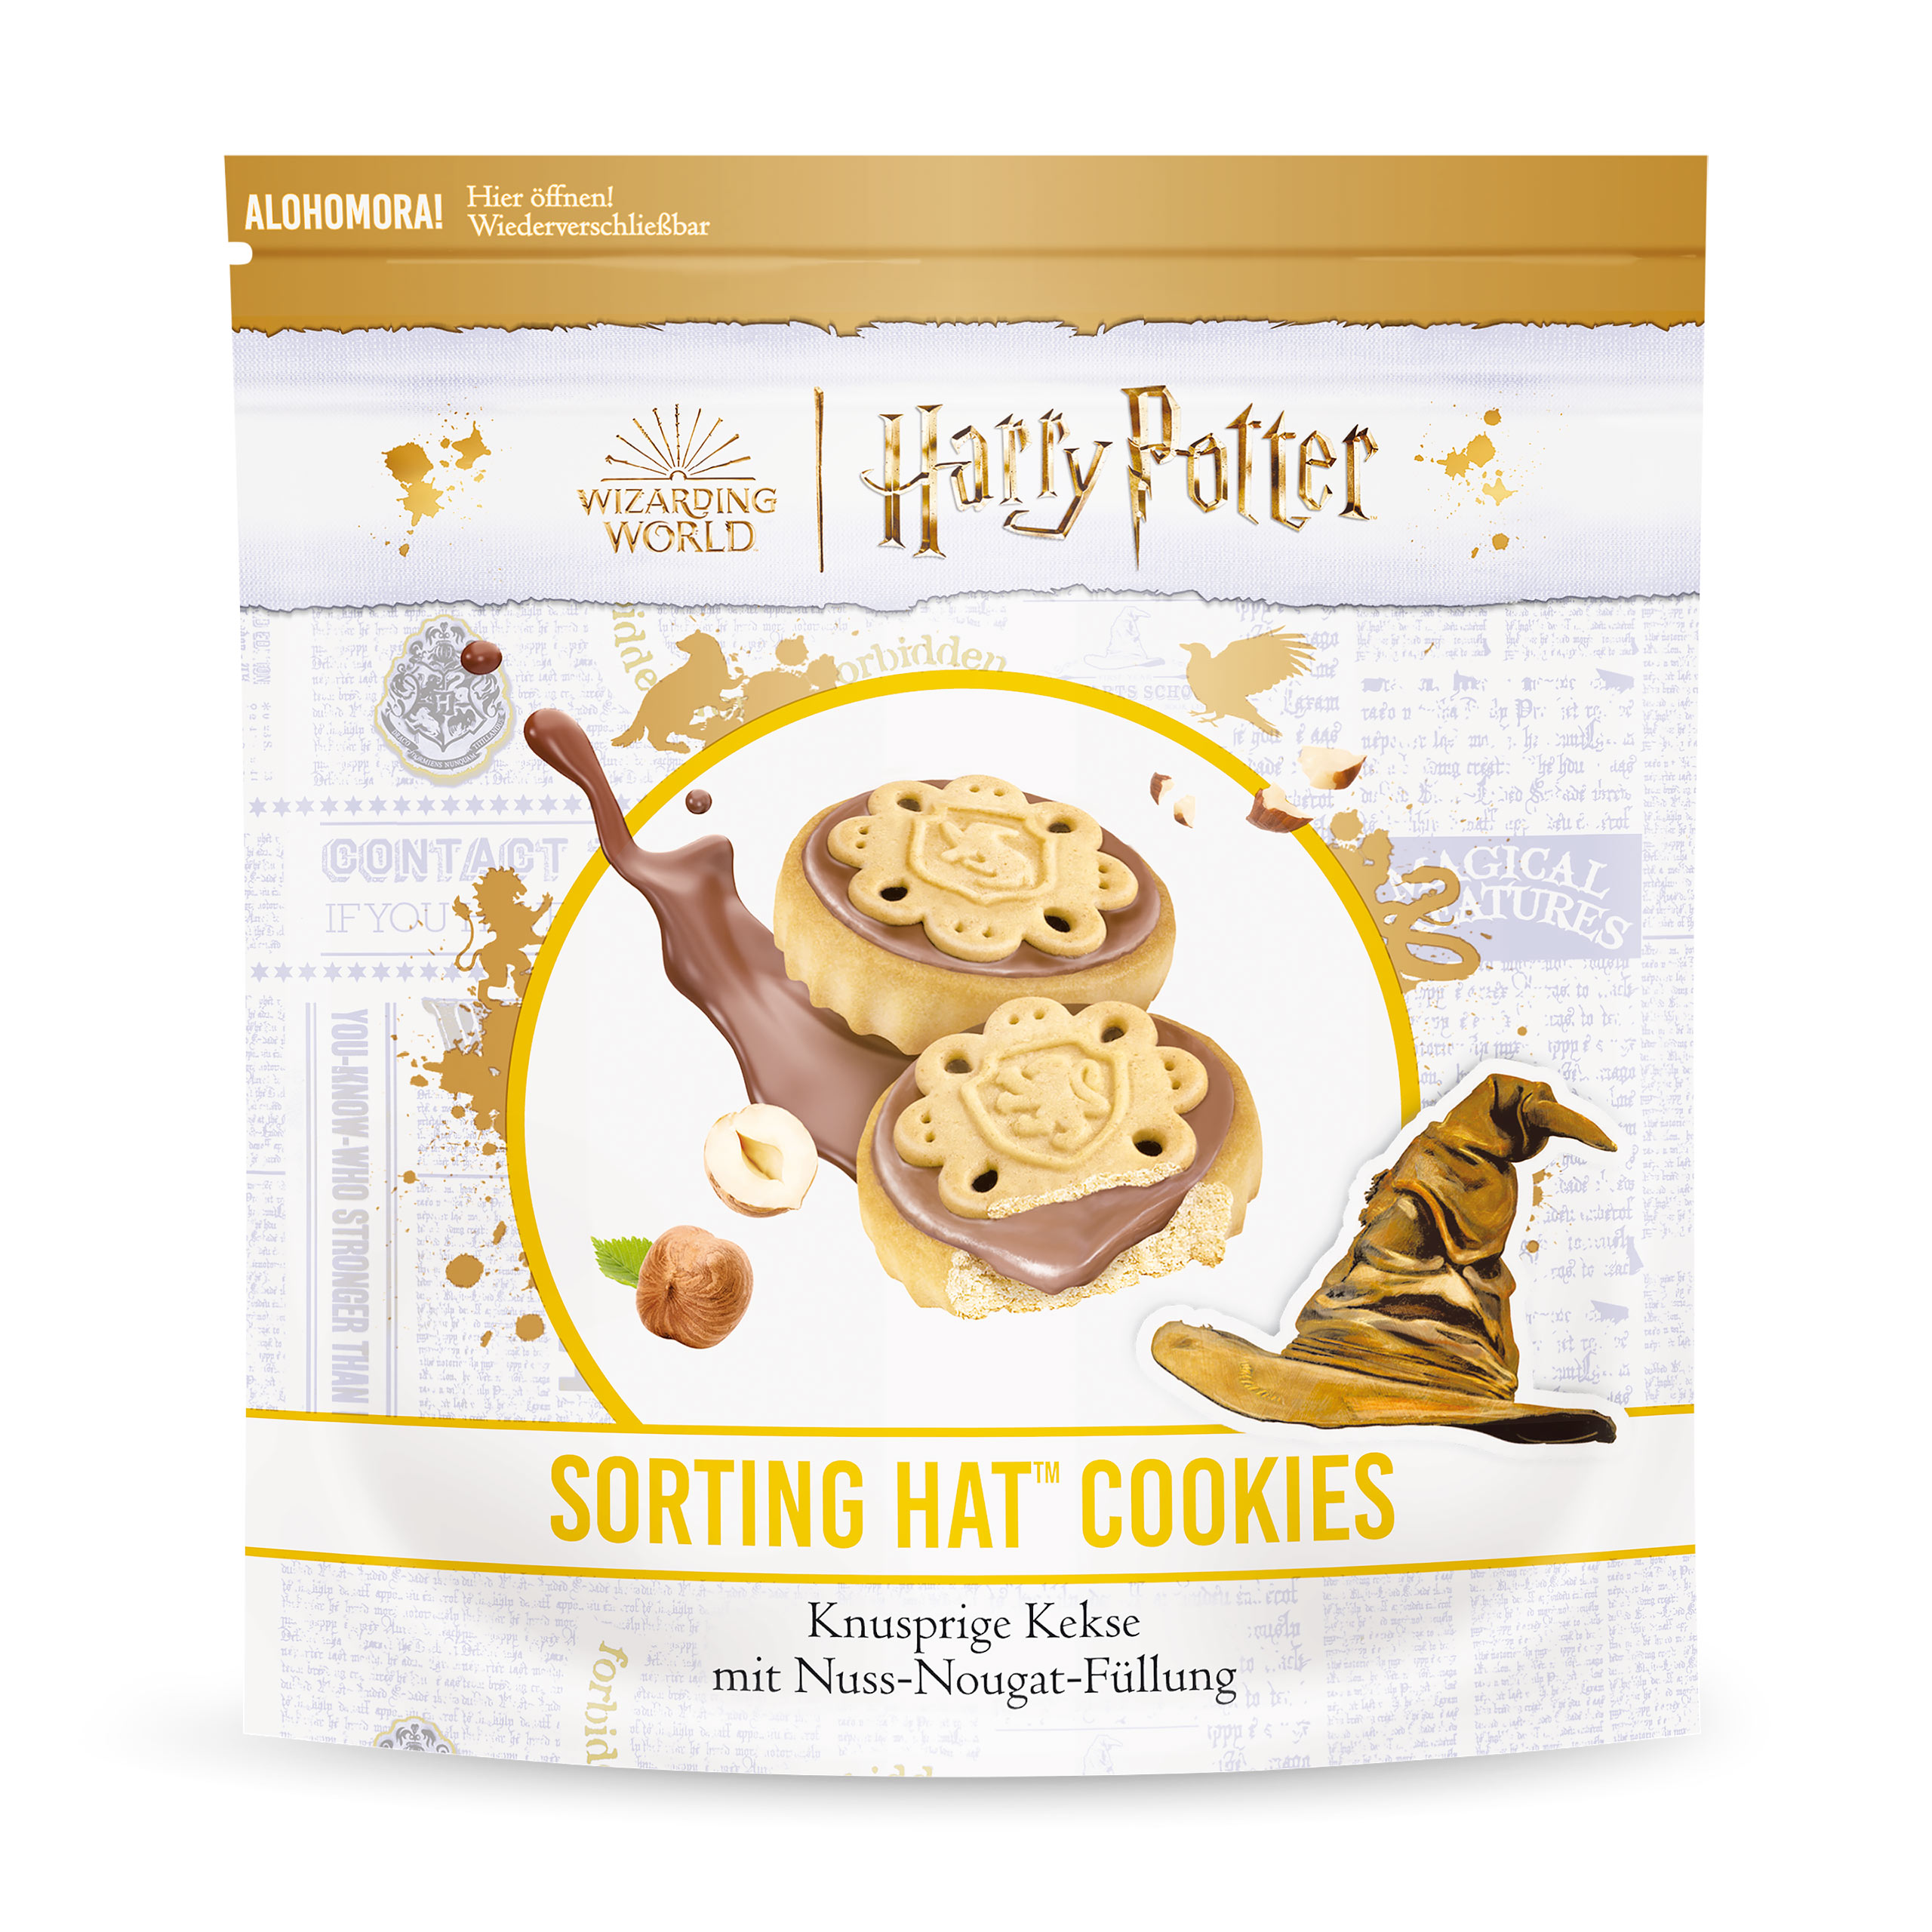 Harry Potter - Cookies with Nut-Nougat Filling